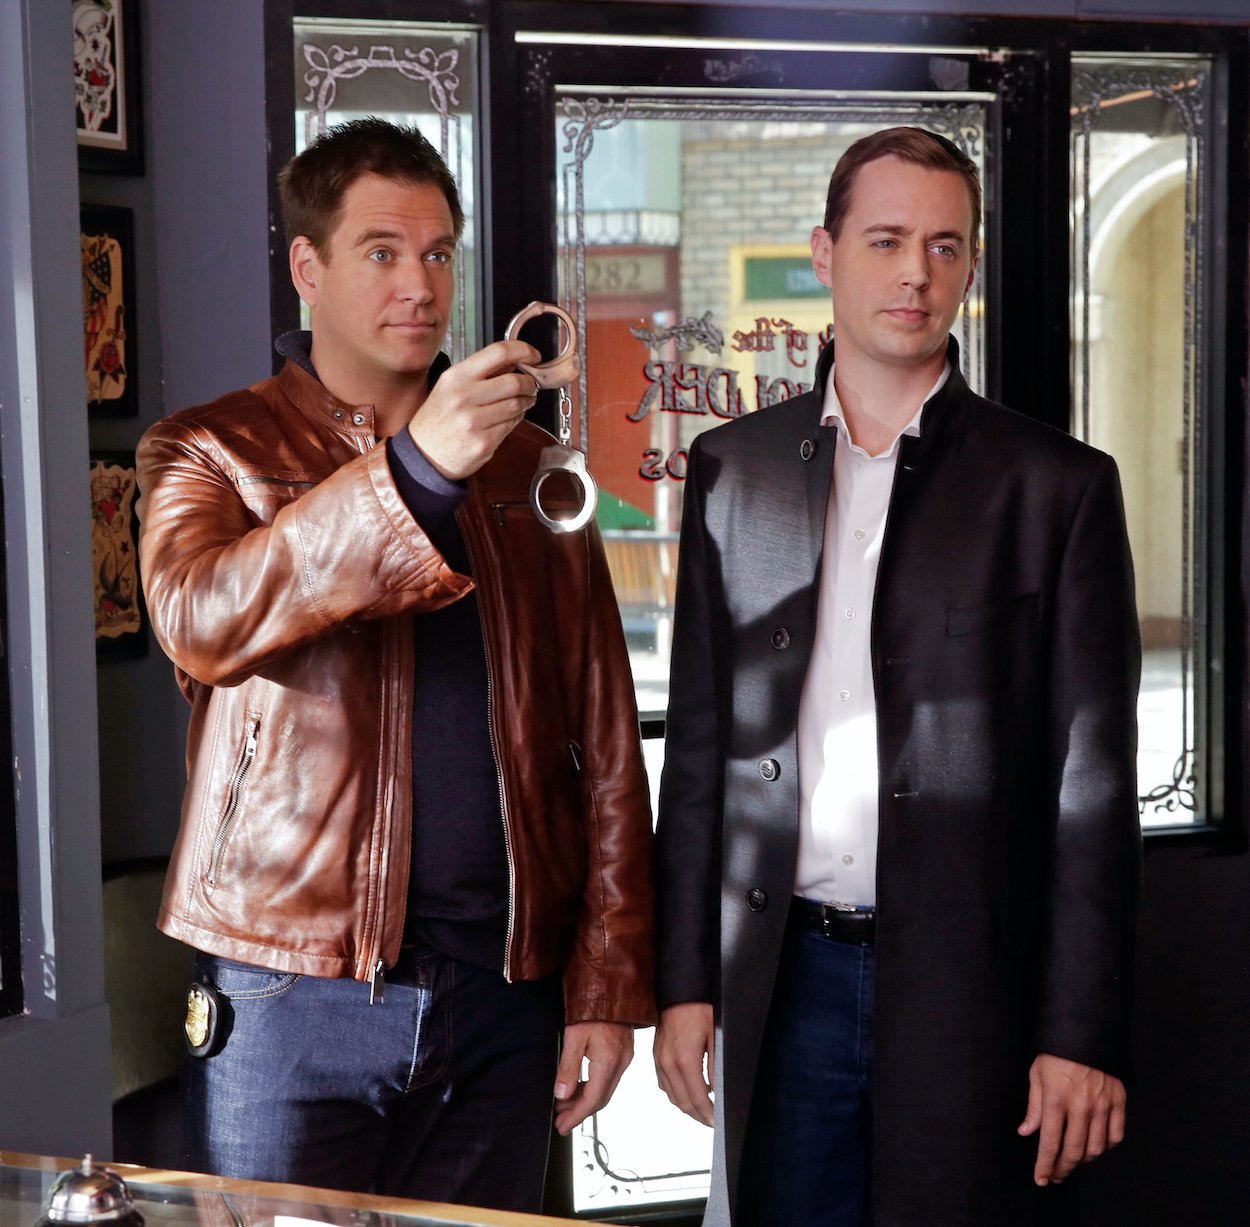 Michael Weatherly (left) and Sean Murray in the 'NCIS' Season 12 episode "Patience." Weatherly has expressed interest in returning to 'NCIS,' but doing it in season 20 would reek of desperation.